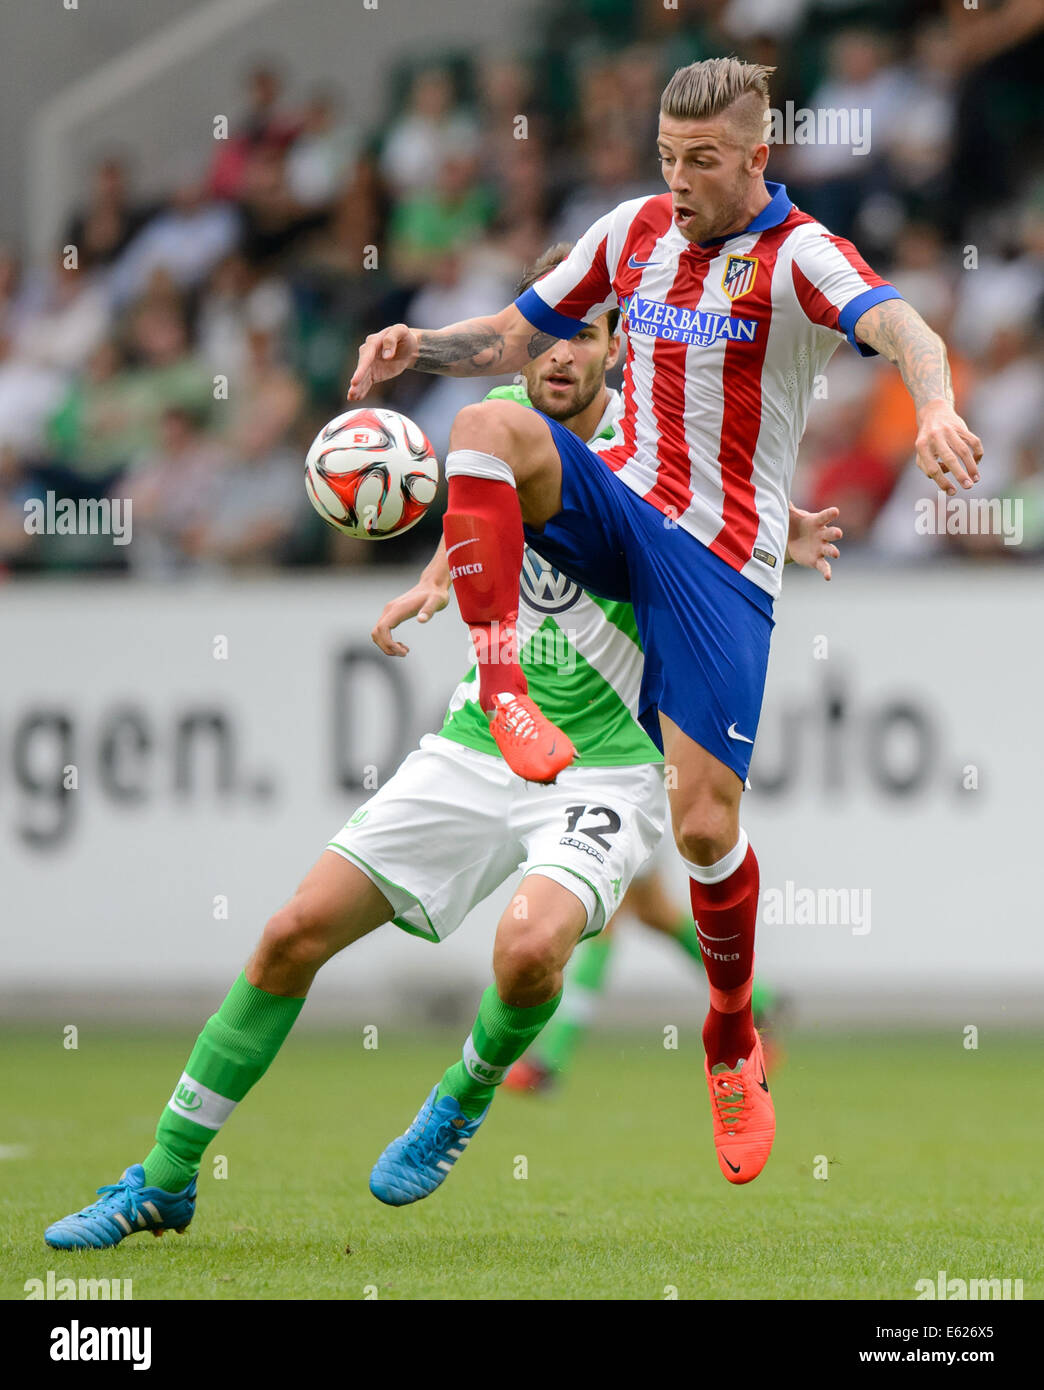 Wolfsburg, Germany. 10th Aug, 2014. Madrid's Toby Alderweireld in action during the soccer test match between VfL Wolfsburg and Atletico Madrid at Volkswagen Arena in Wolfsburg, Germany, 10 August 2014. Photo: Thomas Eisenhuth/dpa/Alamy Live News Stock Photo